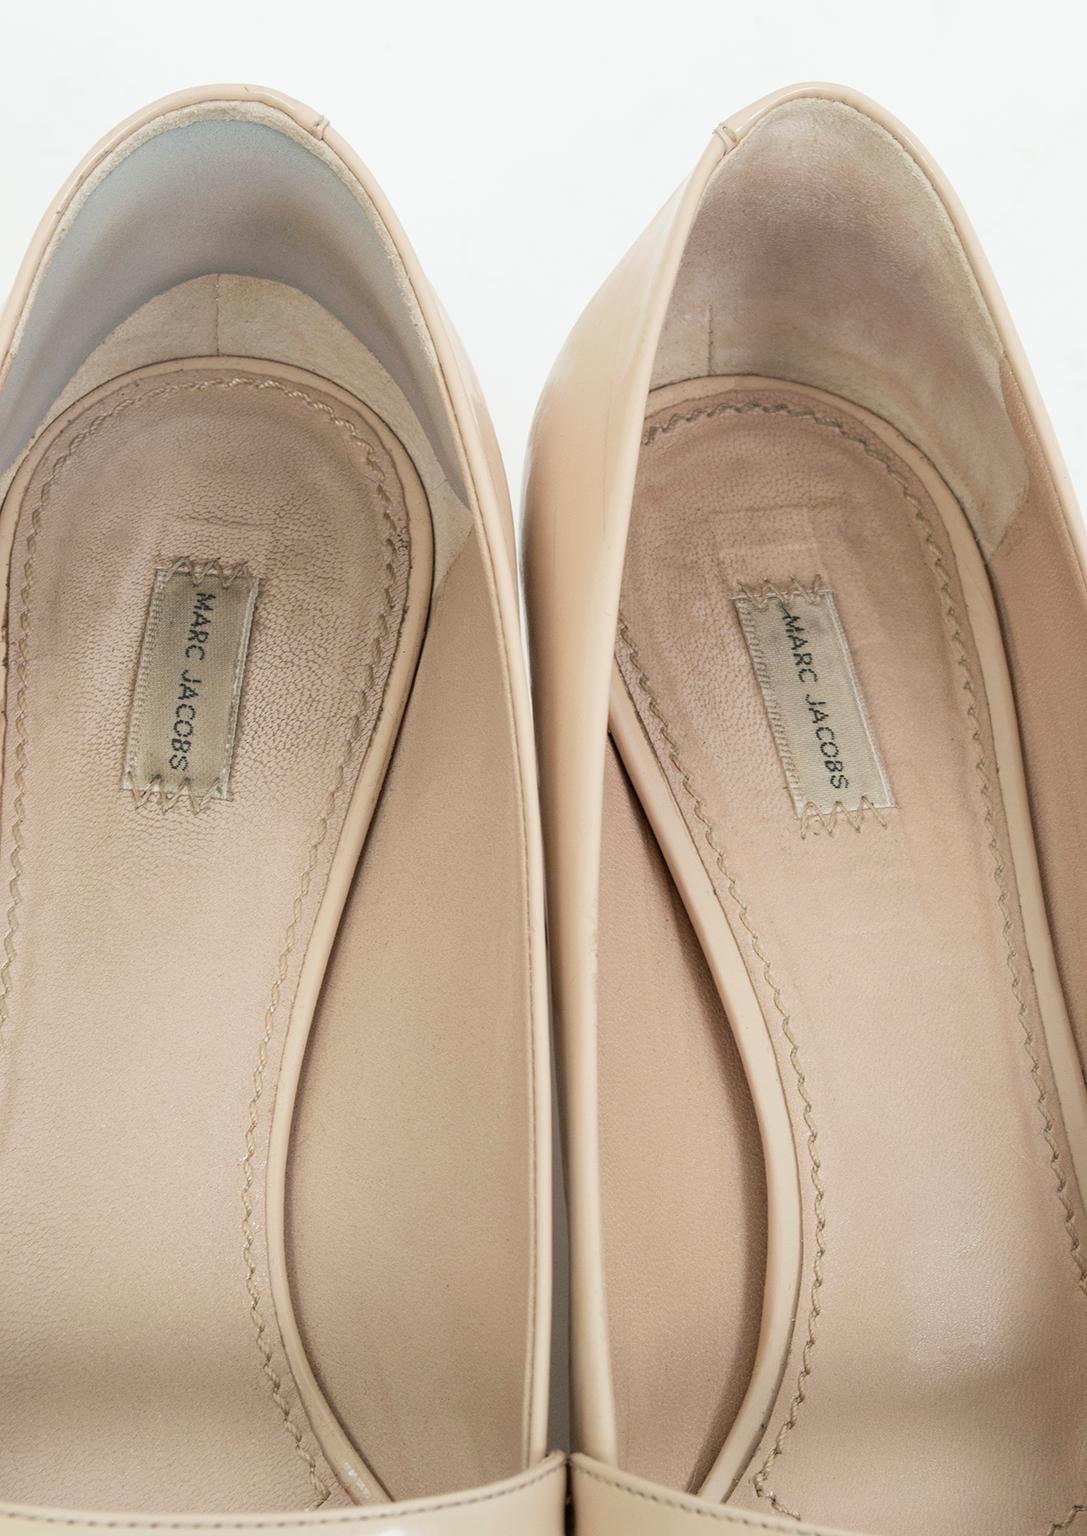 Marc Jacobs Nude Patent Spherical Heel Pointy Mary Jane Pumps – Eu 39, 2012 In Good Condition For Sale In Tucson, AZ